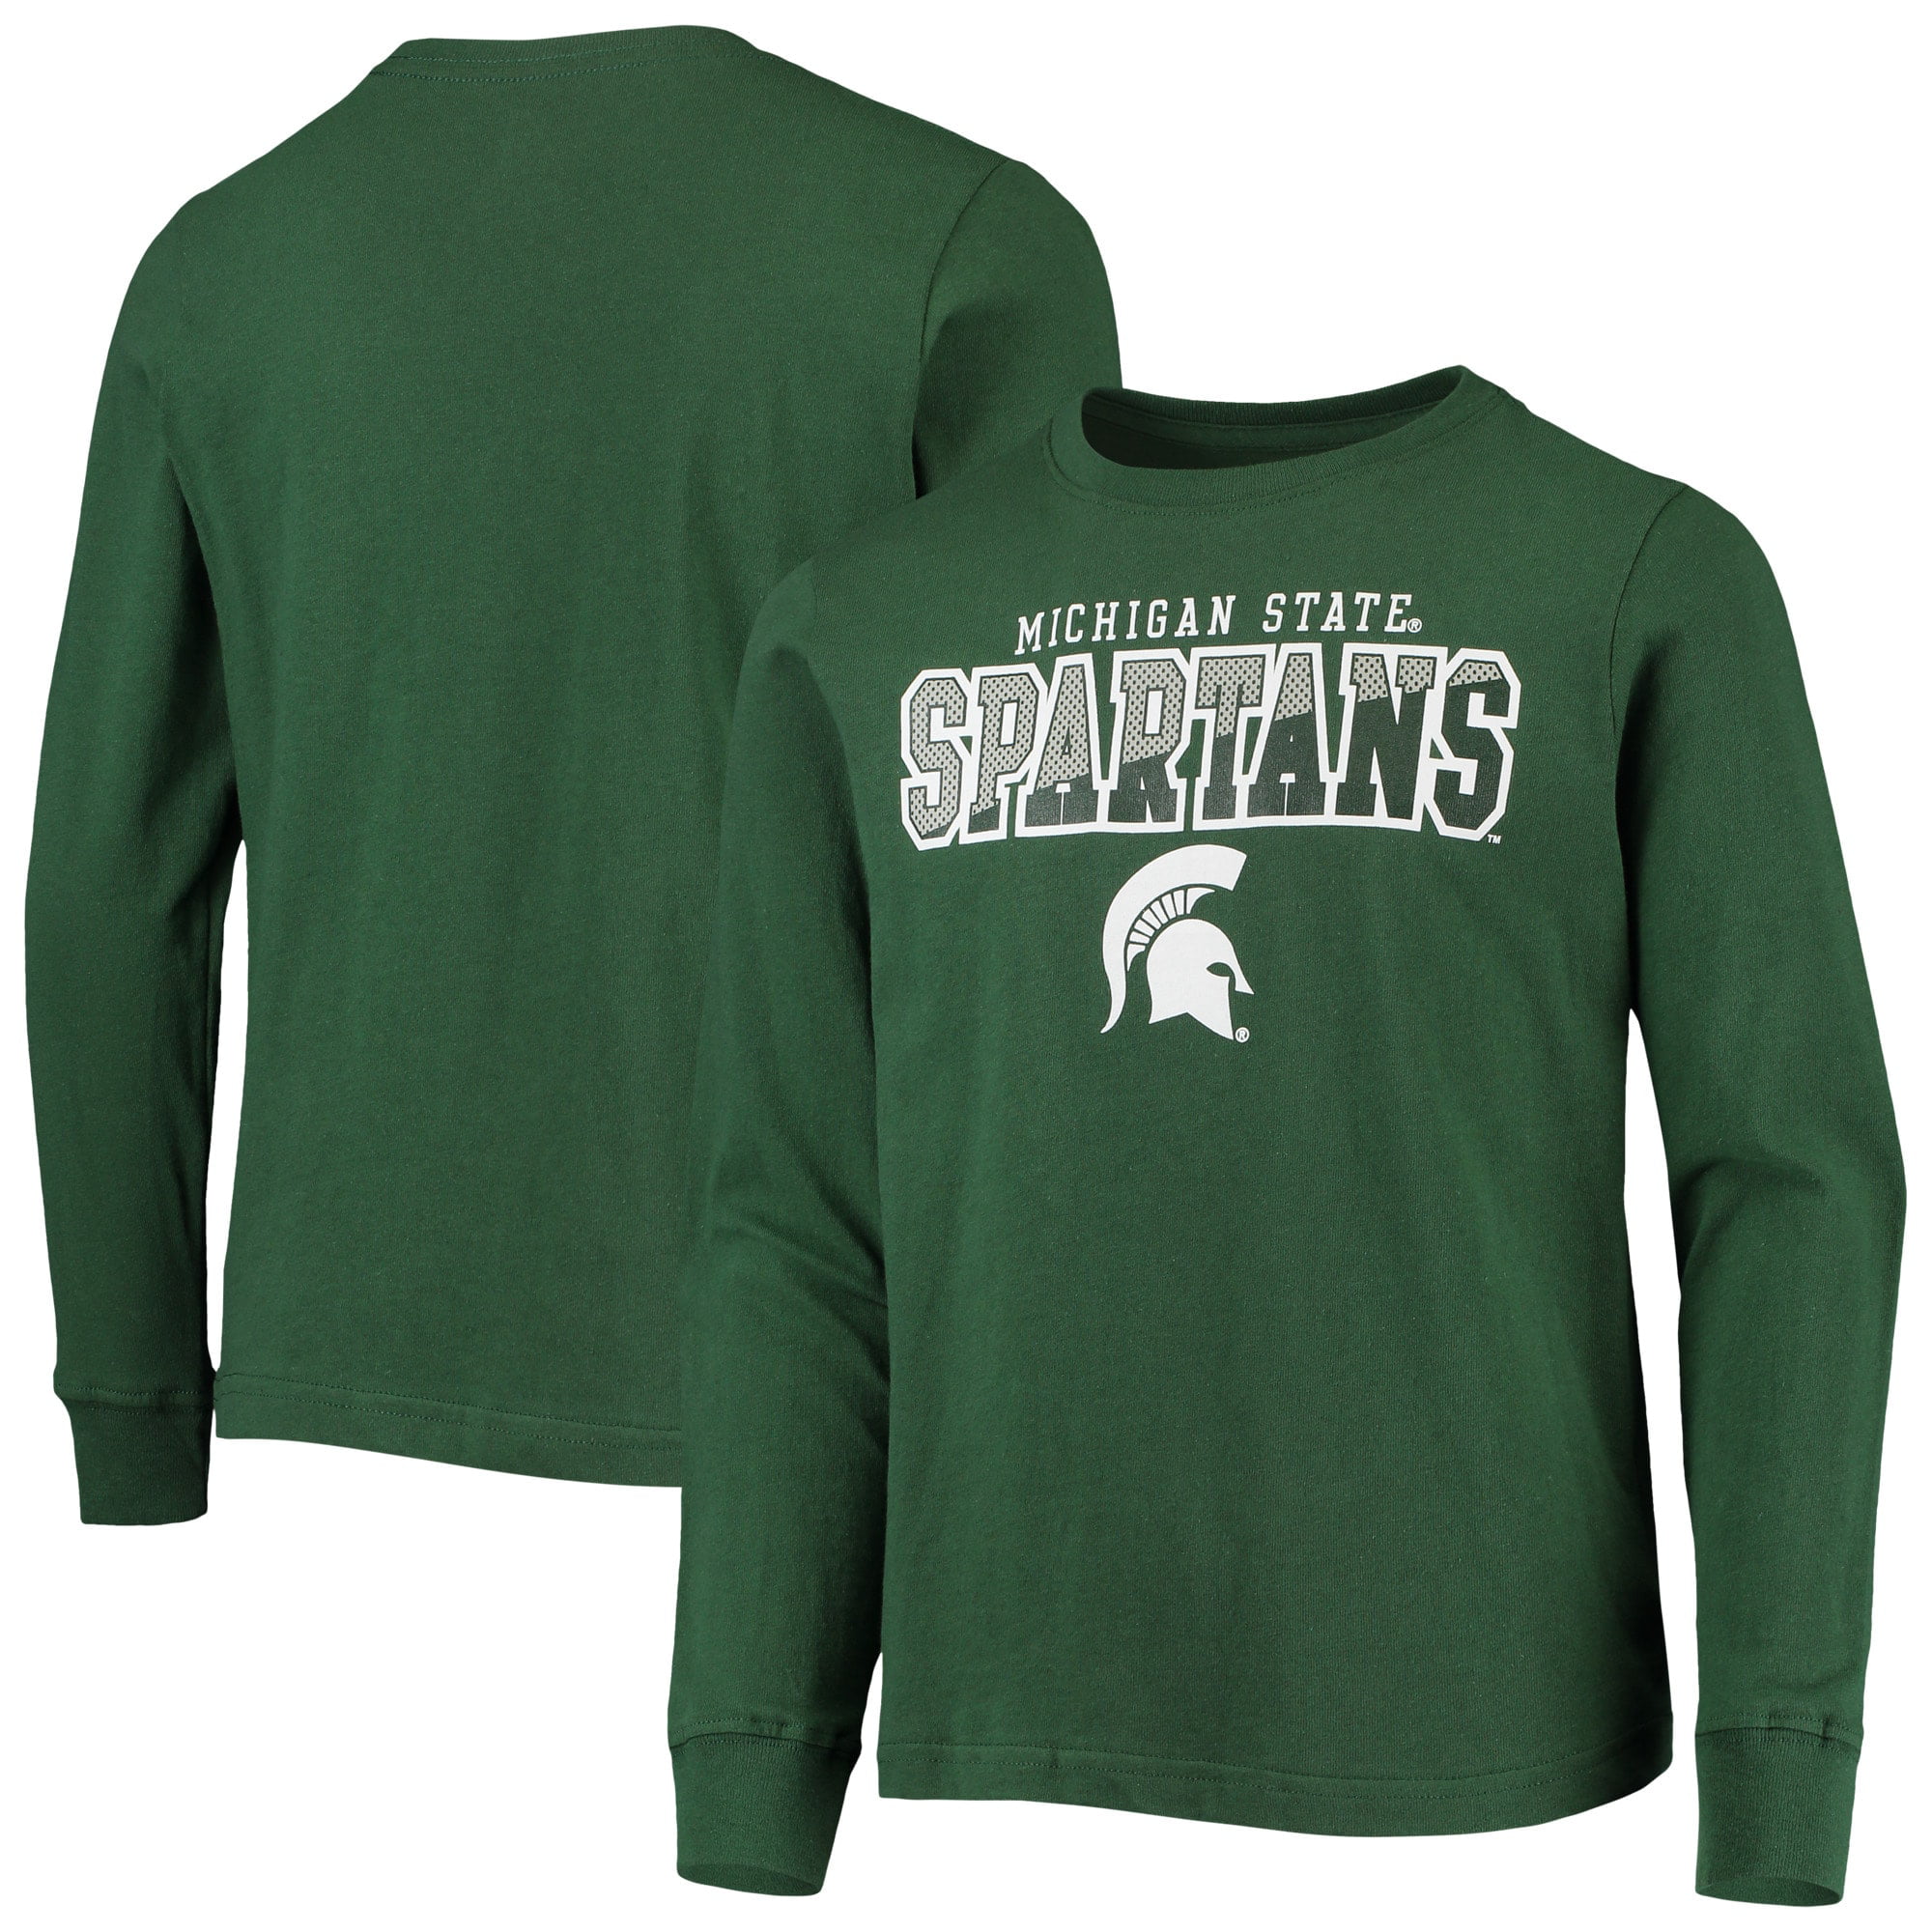 Michigan State University Spartans Baby and Toddler Sweater Dress 